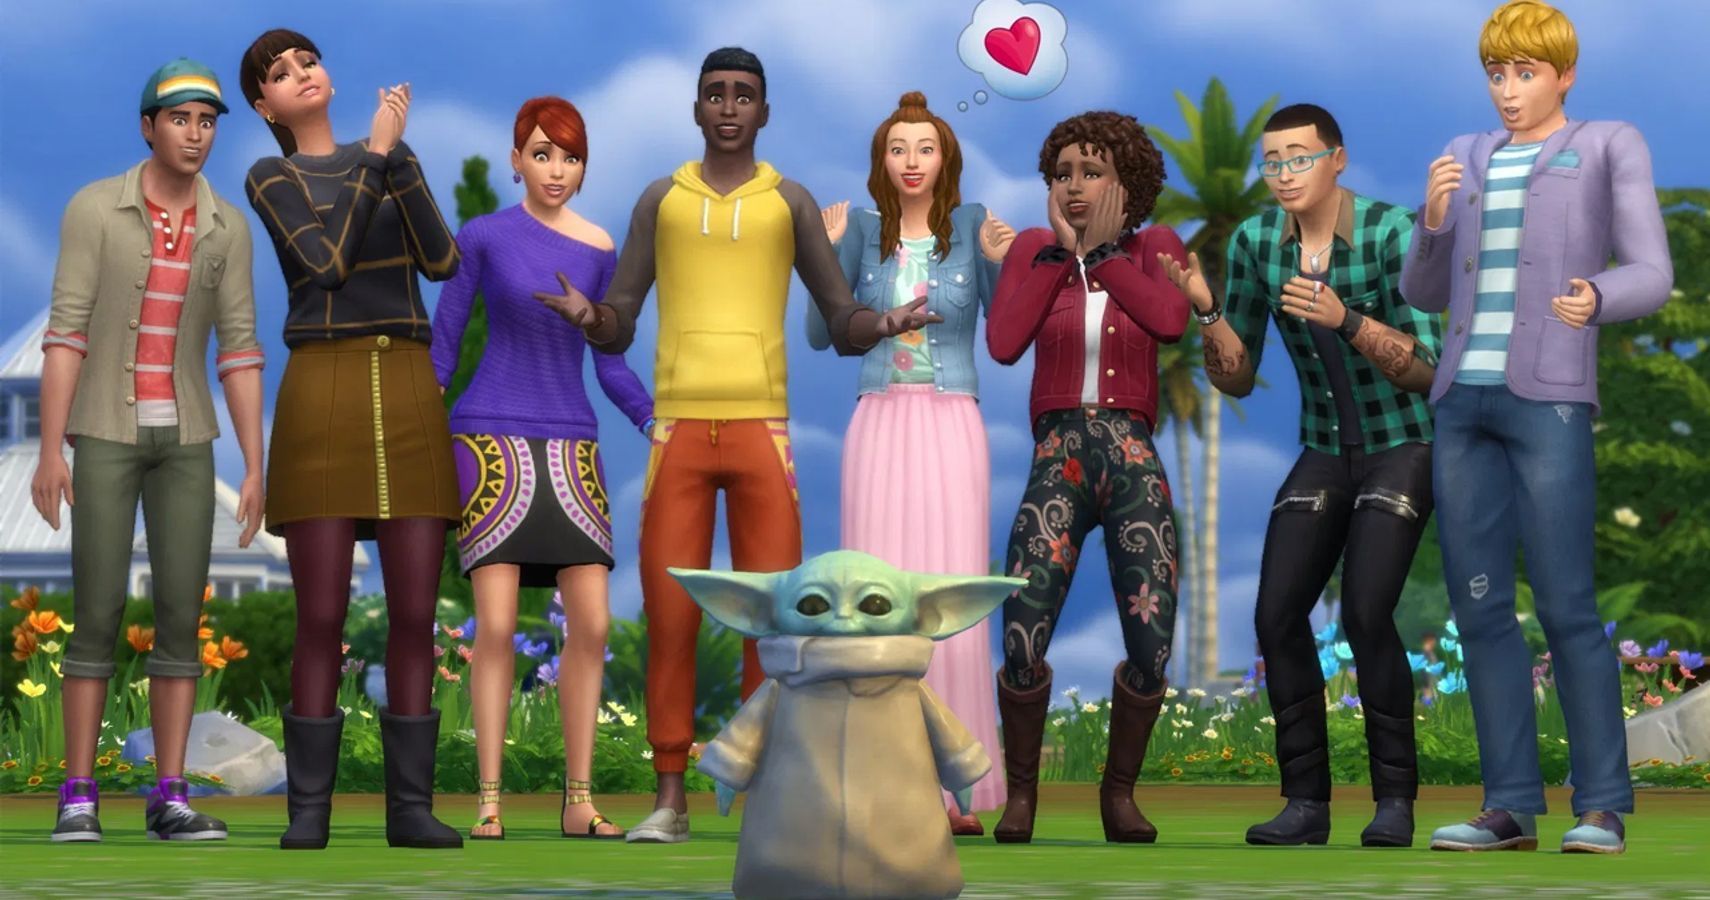 mod for the sims 4